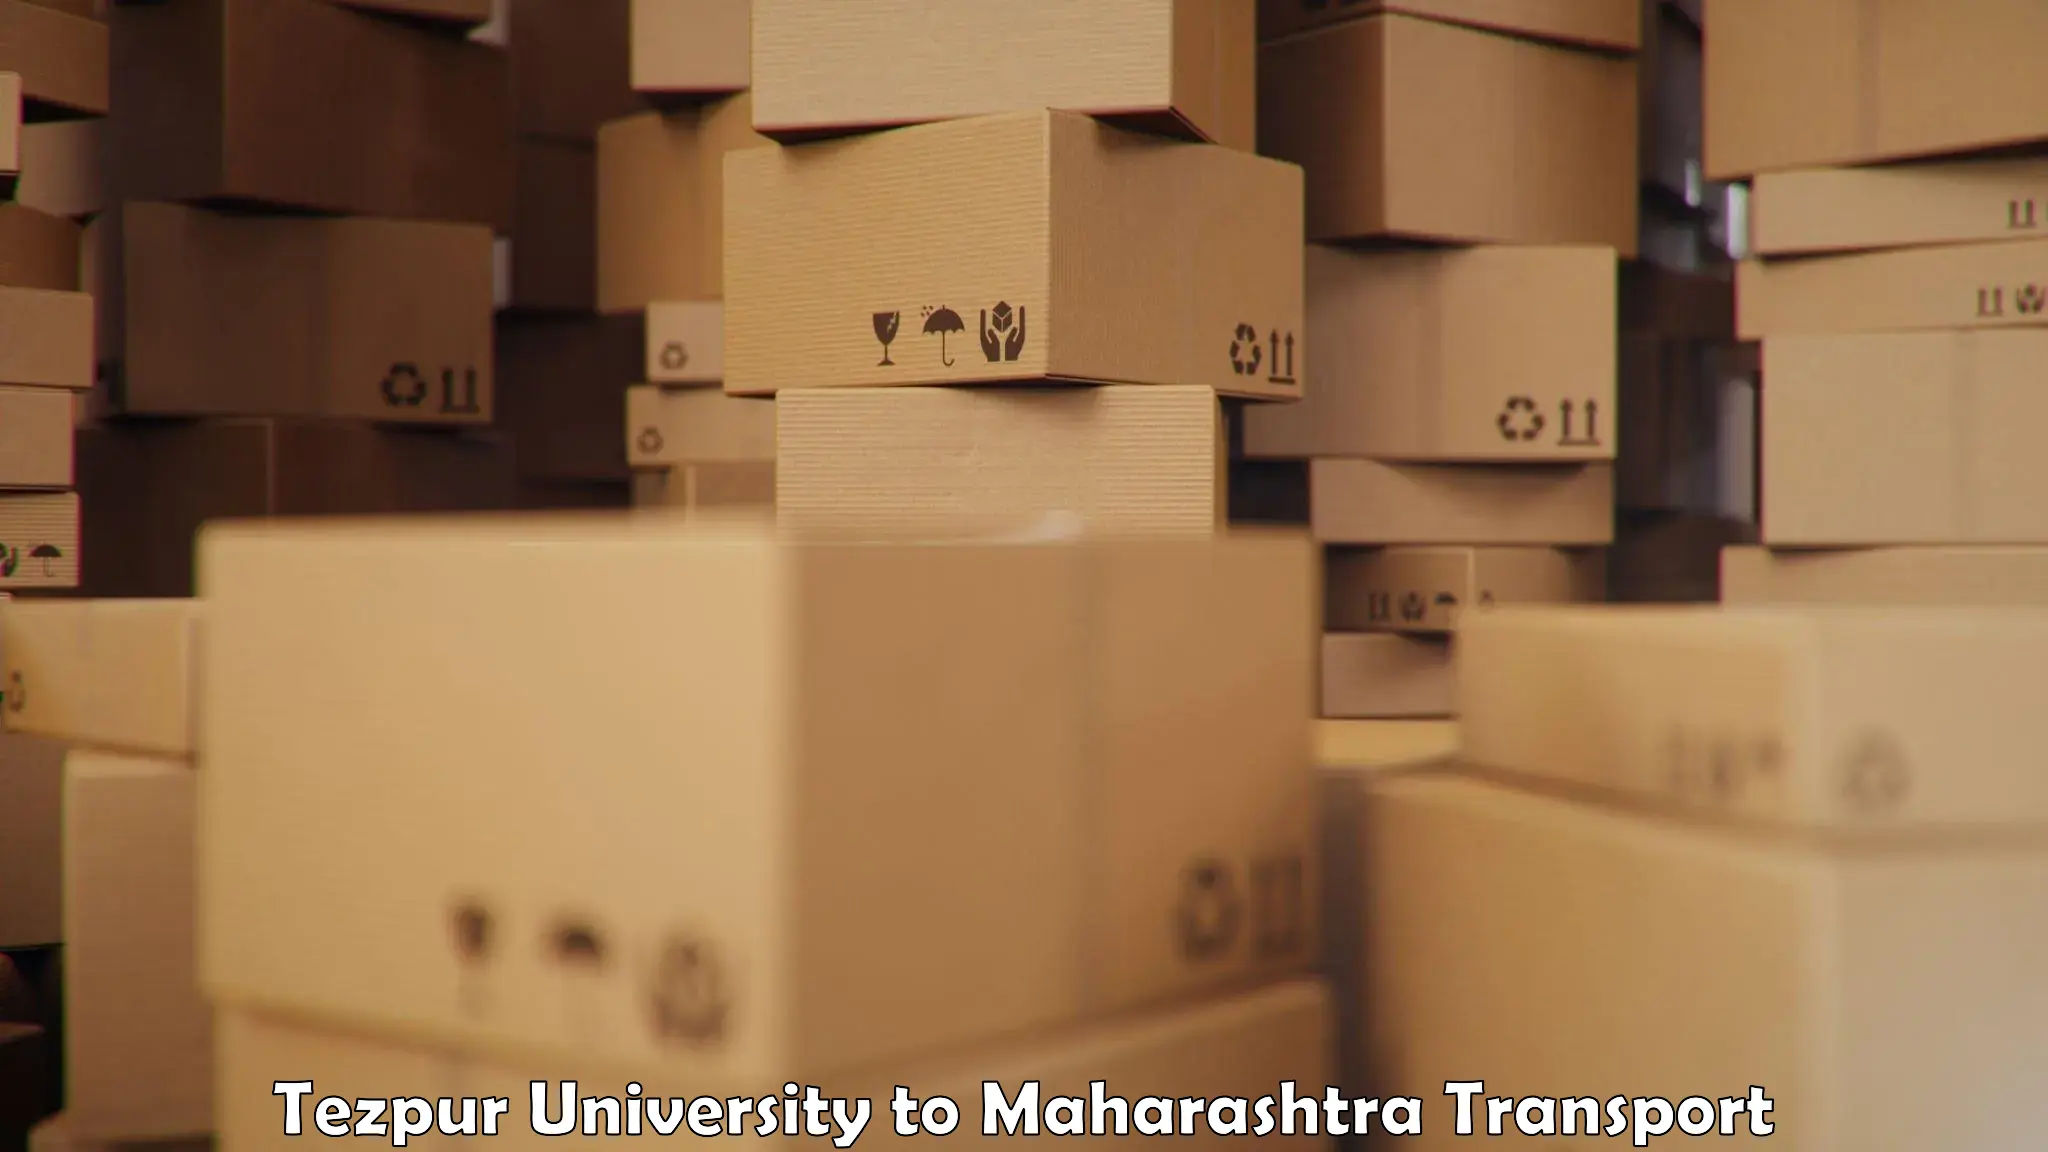 Truck transport companies in India Tezpur University to Lonikand